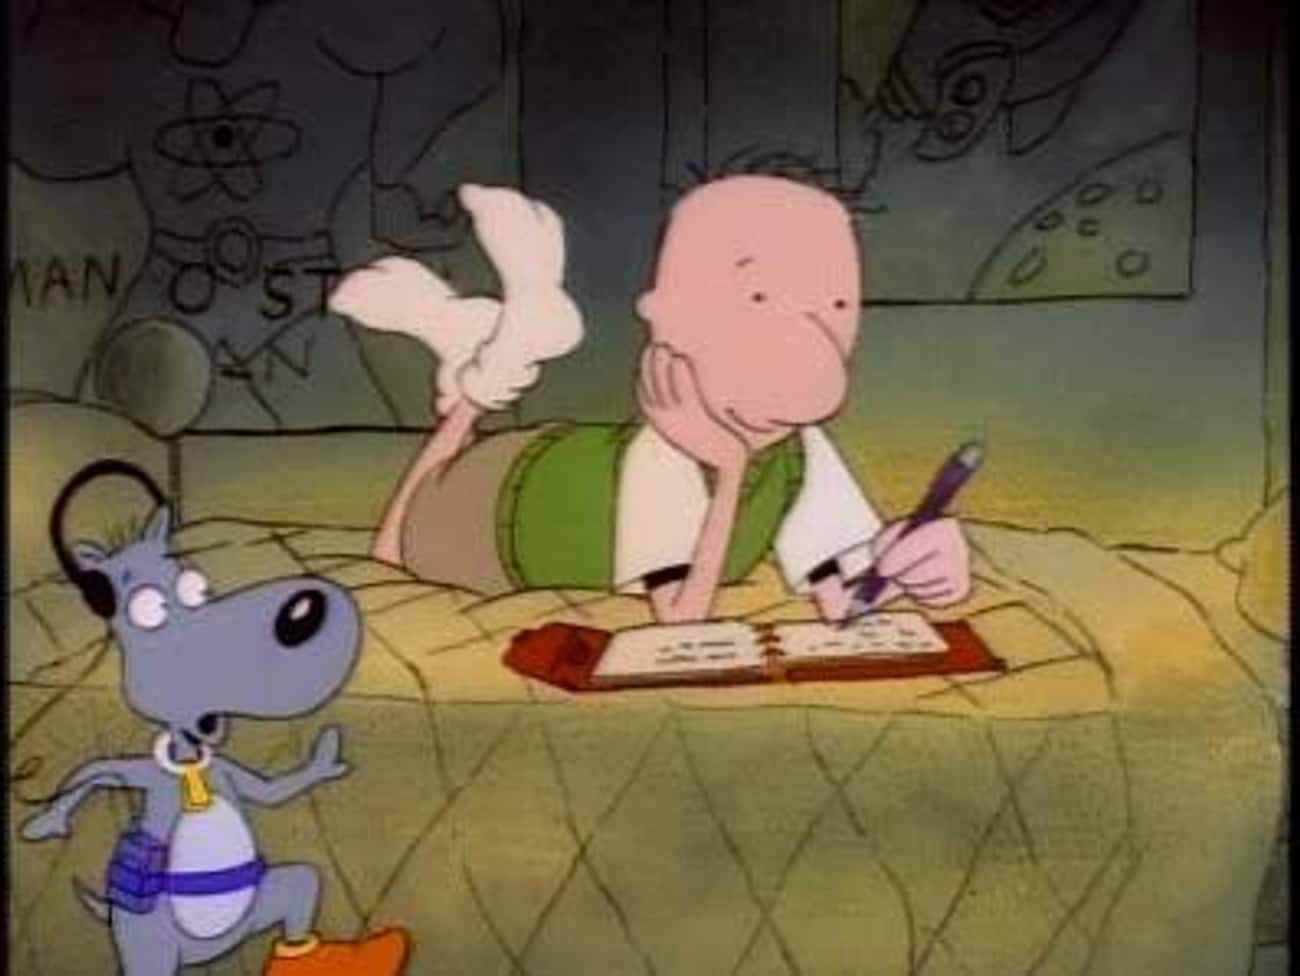 The Events Of The Show Are A Manifestation Of Doug's Imagined Narrative